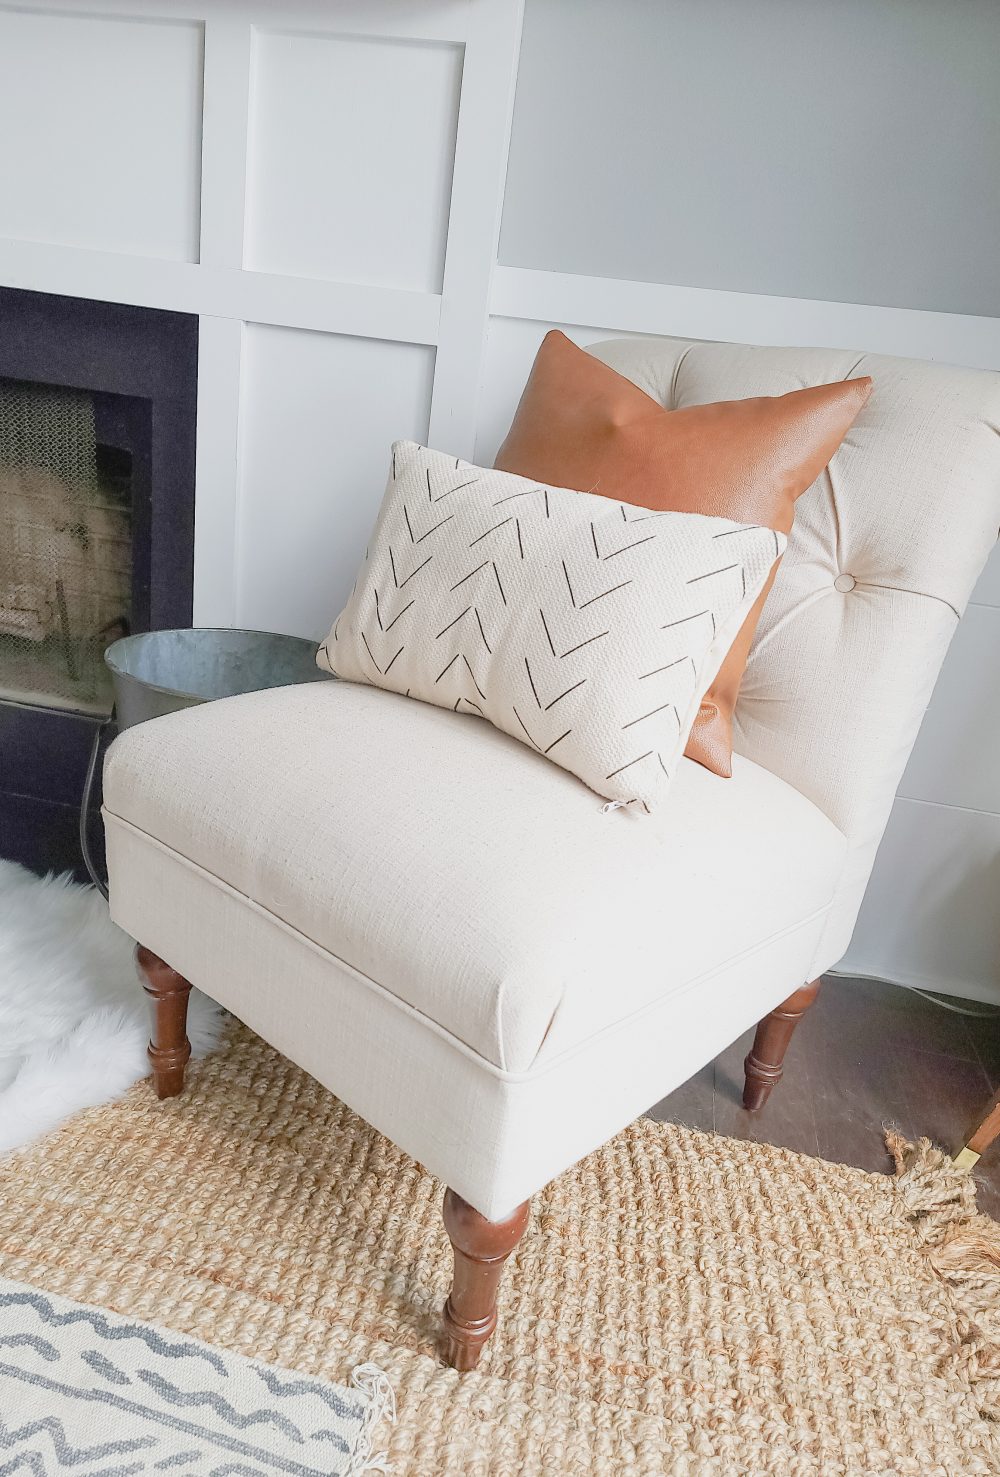 Woven Nook Pillows on Target Chair